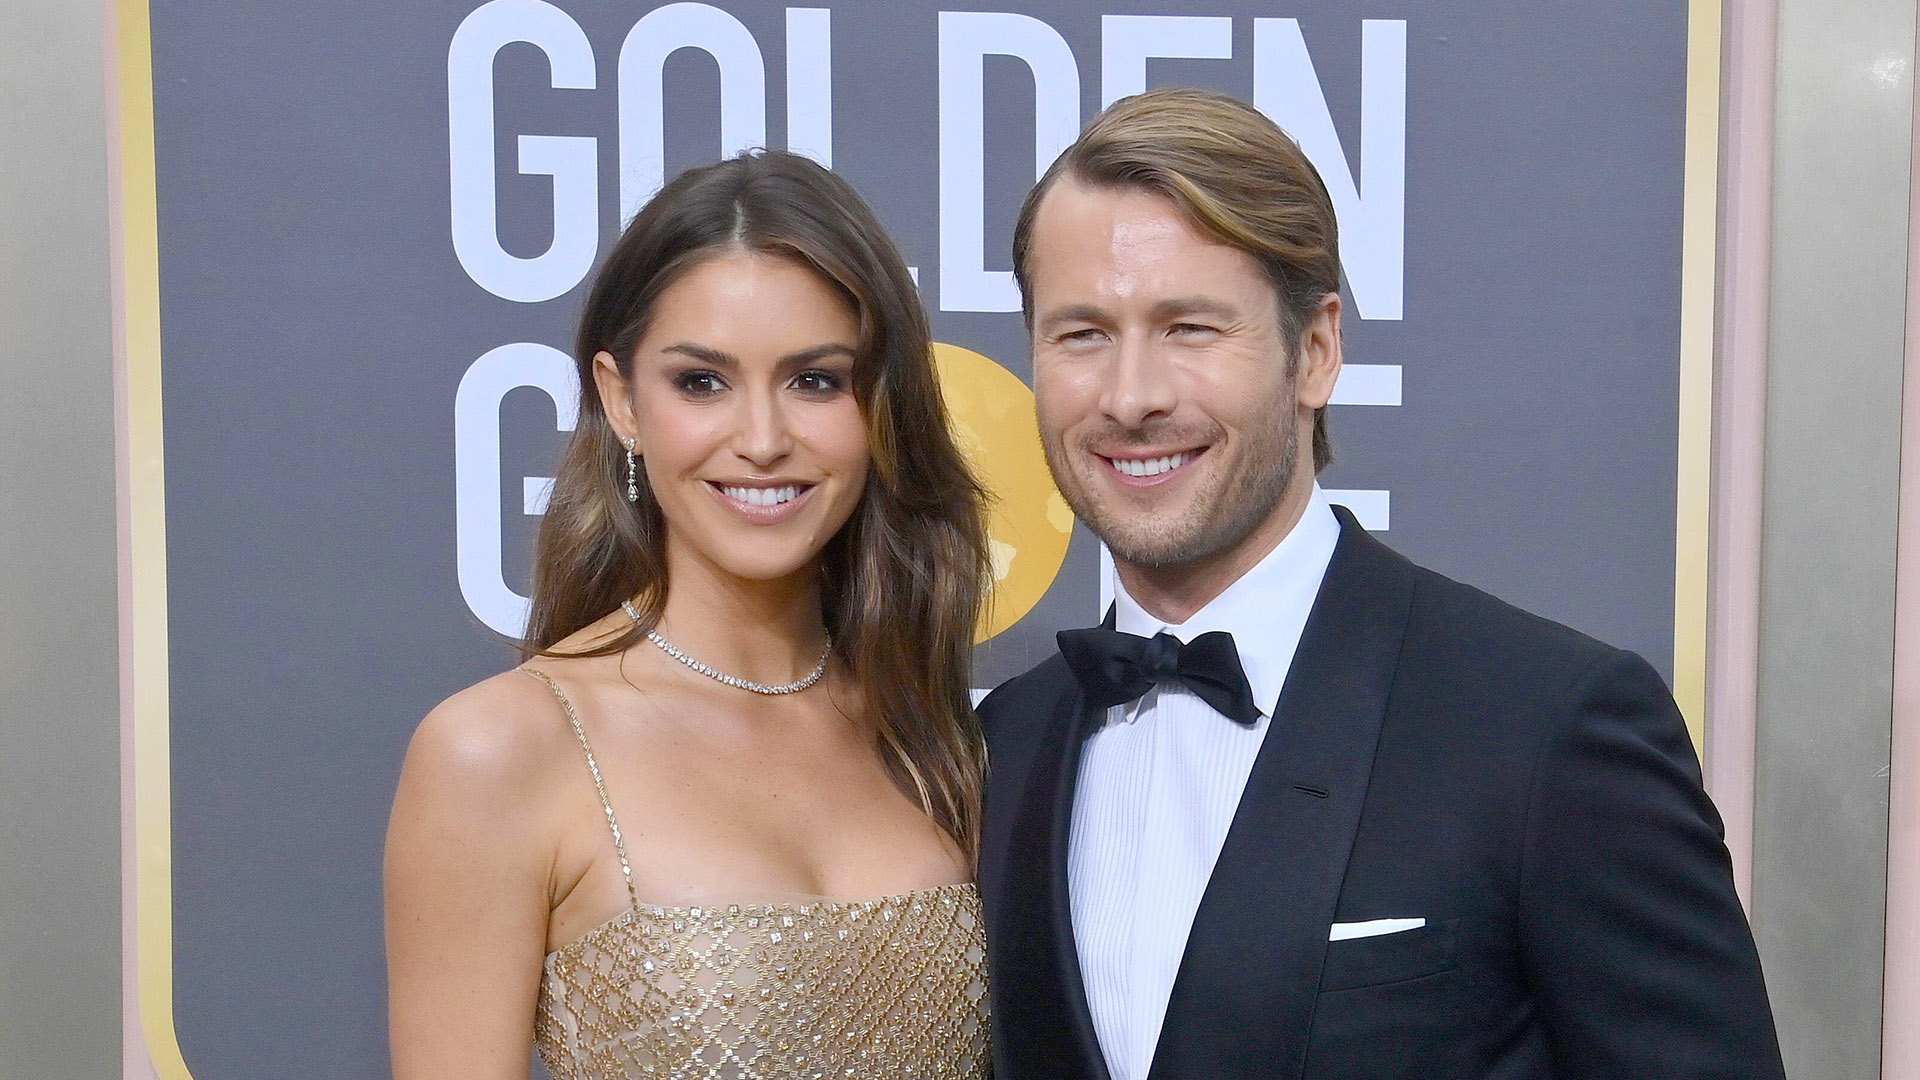 Glen Powell and Gigi Paris No Longer a Thing, Split After 3 Years Together